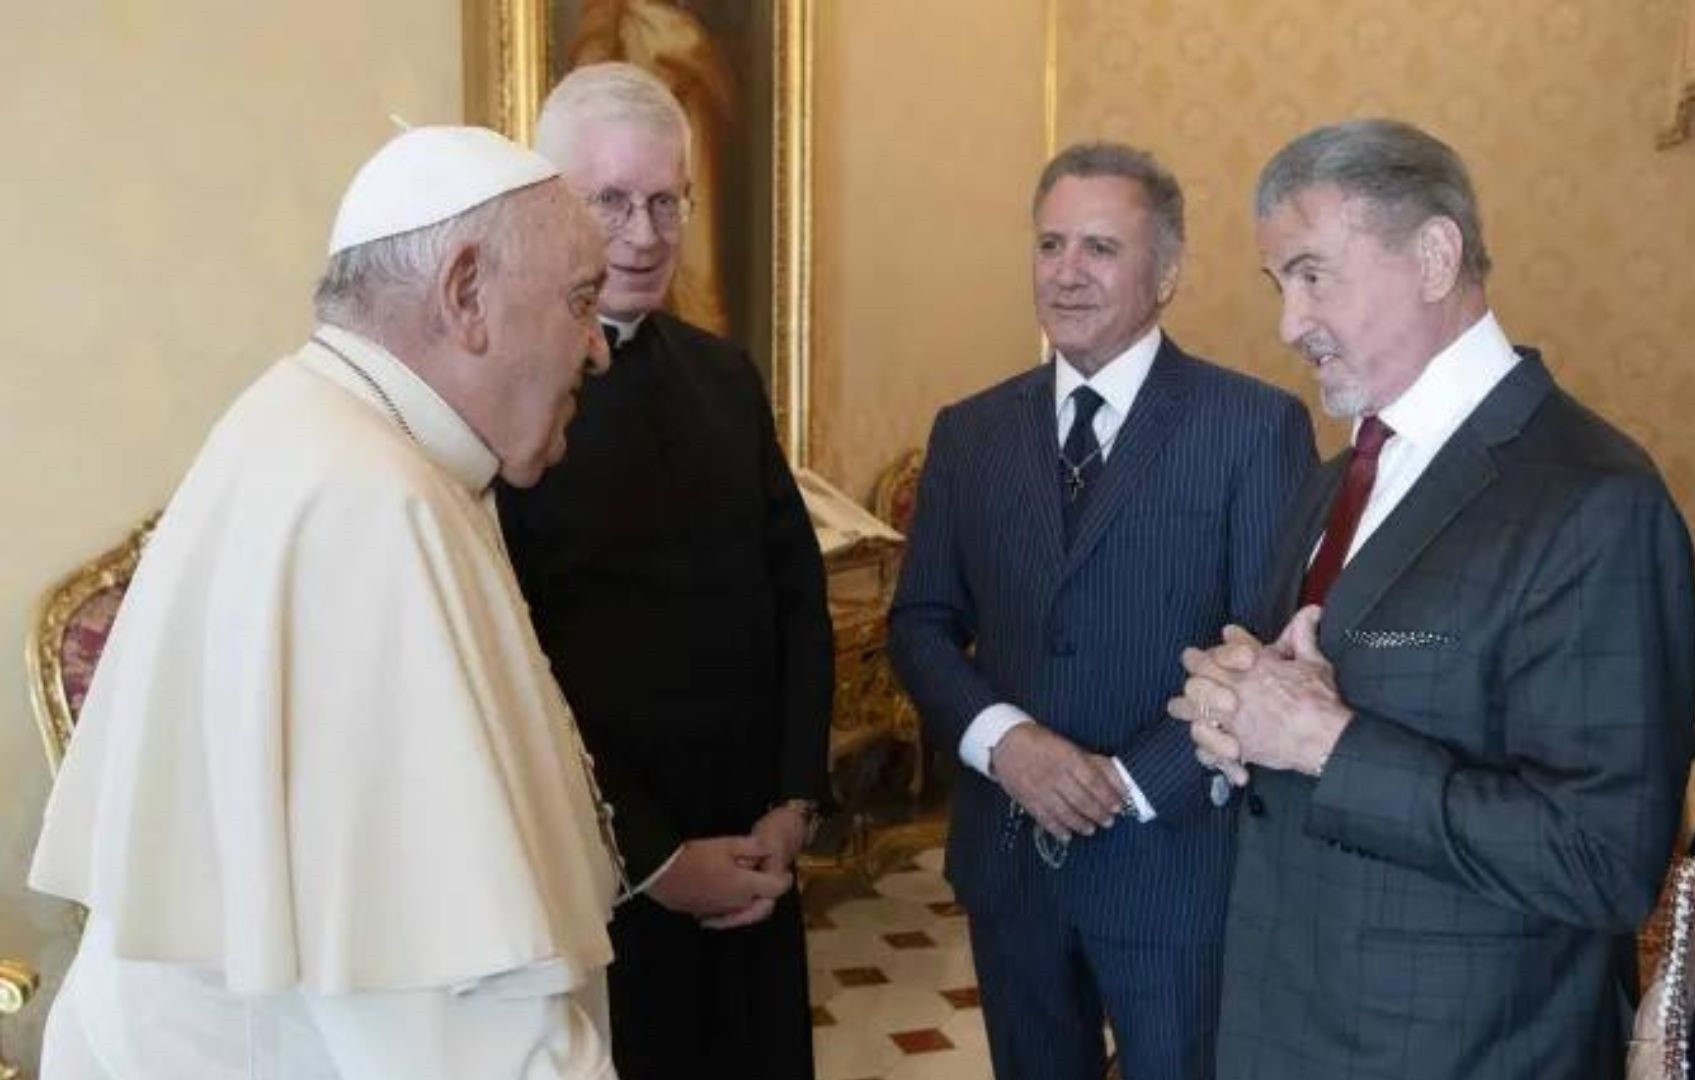 'Ready? We box!': Sylvester Stallone 'spars' with Pope Francis during Vatican meeting